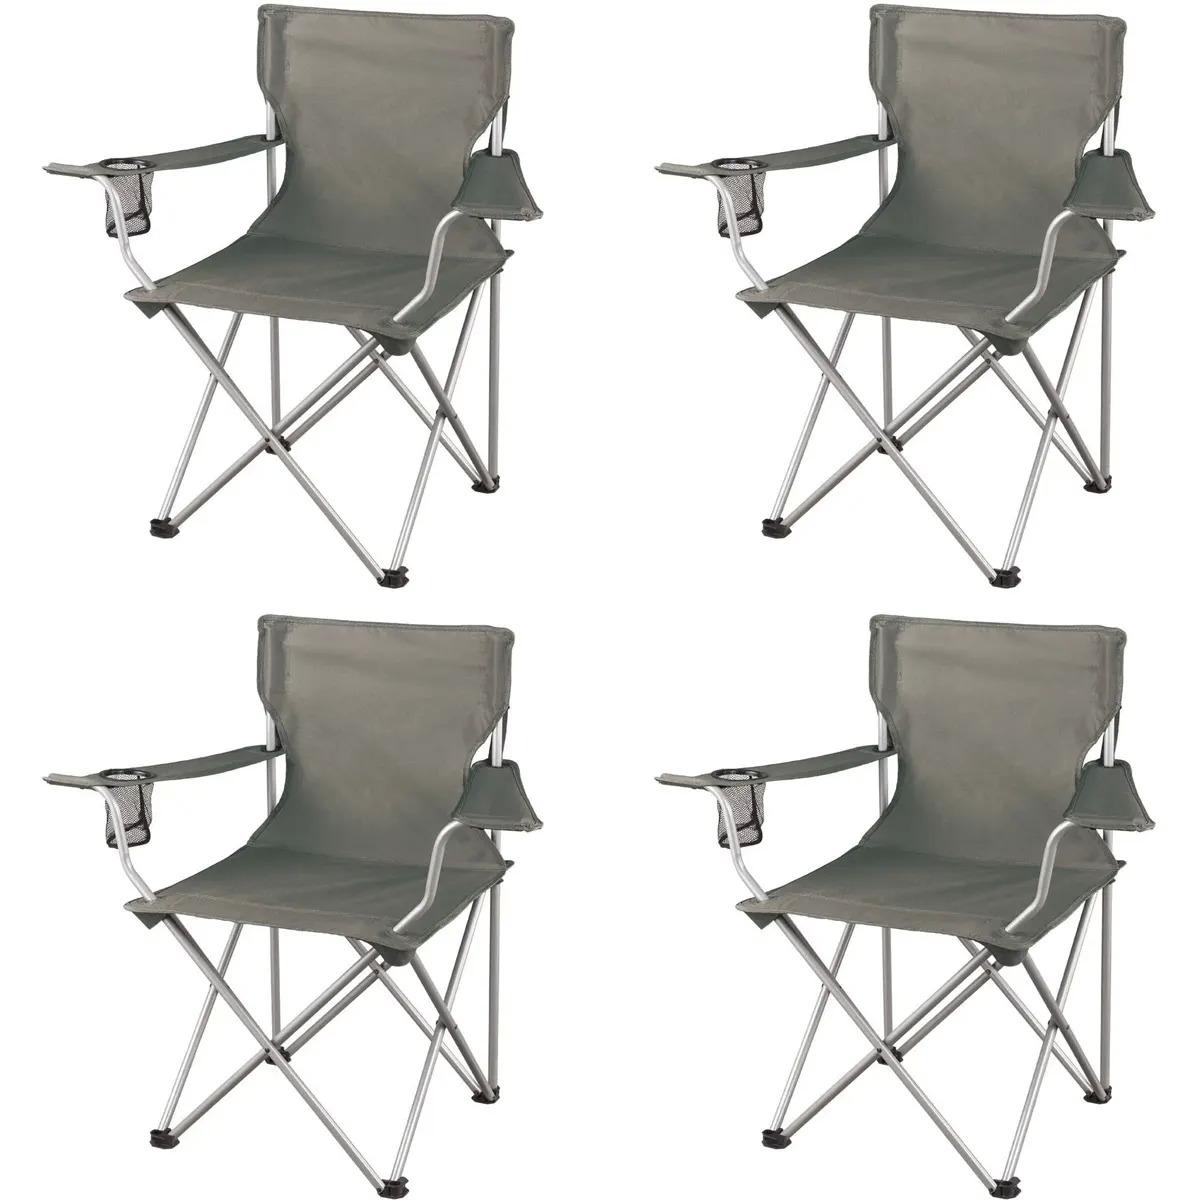 Ozark Trail Classic Folding Camp Chairs 4 Pack for $28